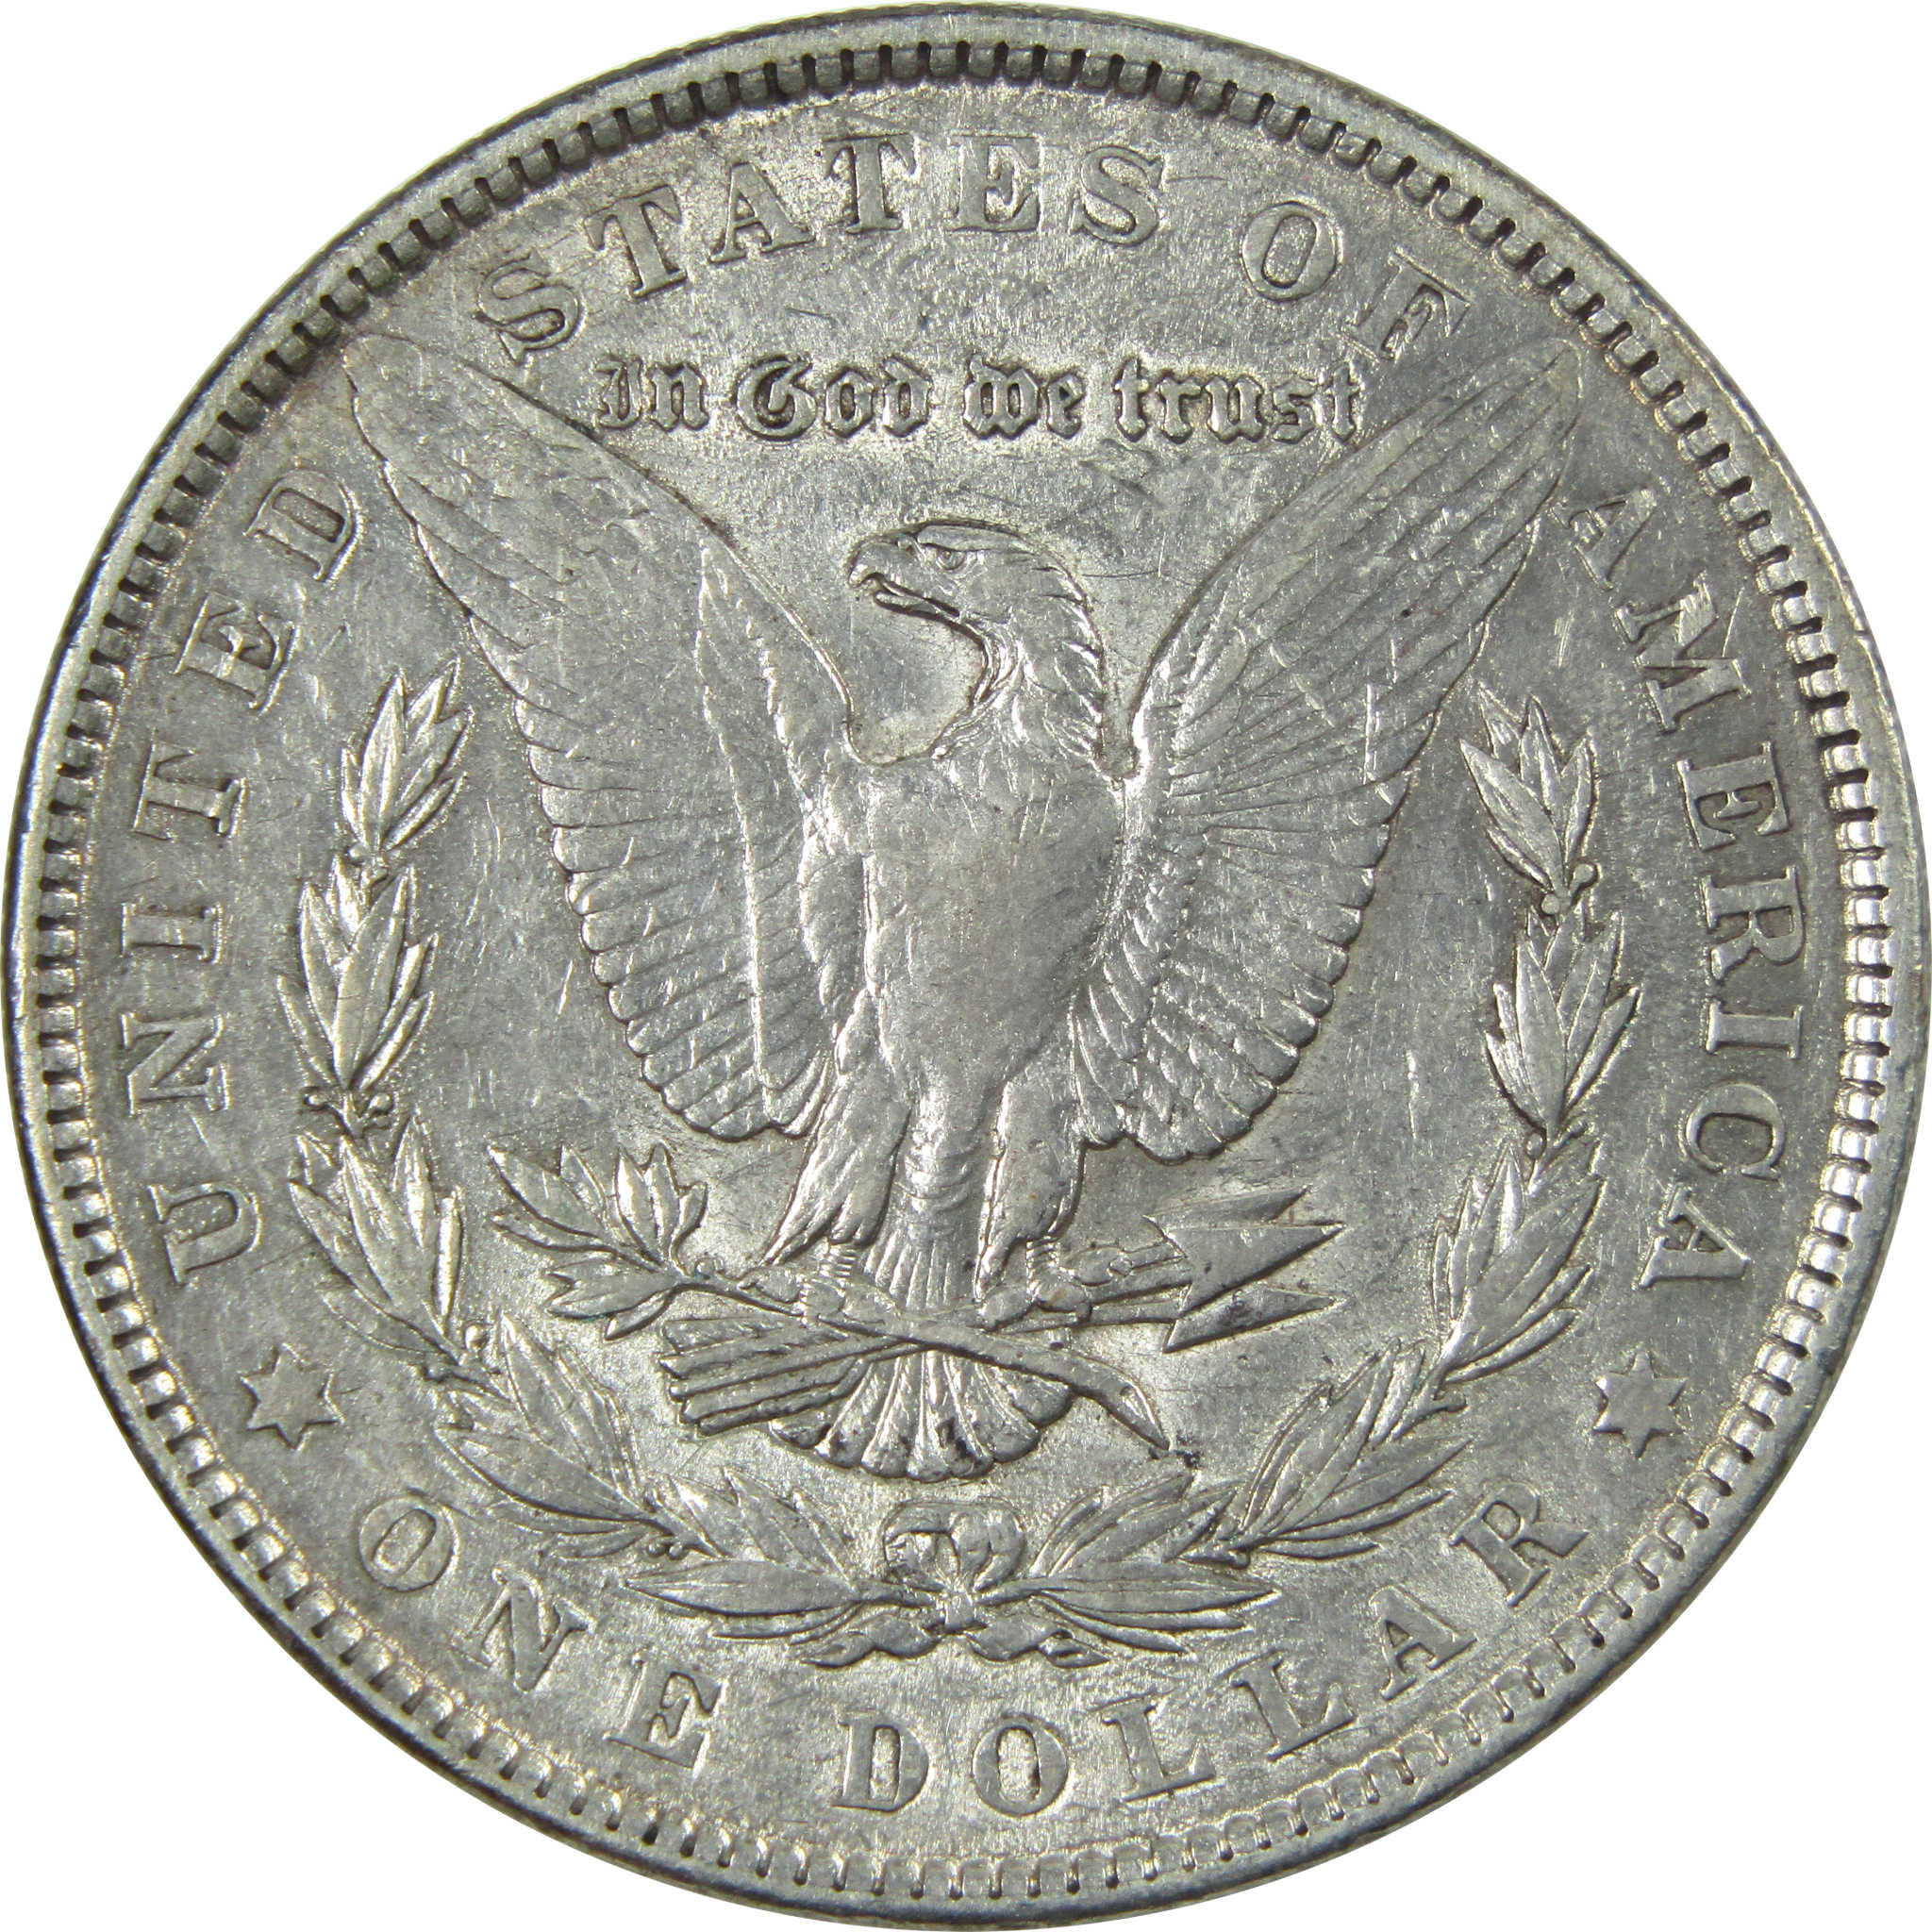 1901 Morgan Dollar AU About Uncirculated Silver $1 Coin SKU:I13953 - Morgan coin - Morgan silver dollar - Morgan silver dollar for sale - Profile Coins &amp; Collectibles